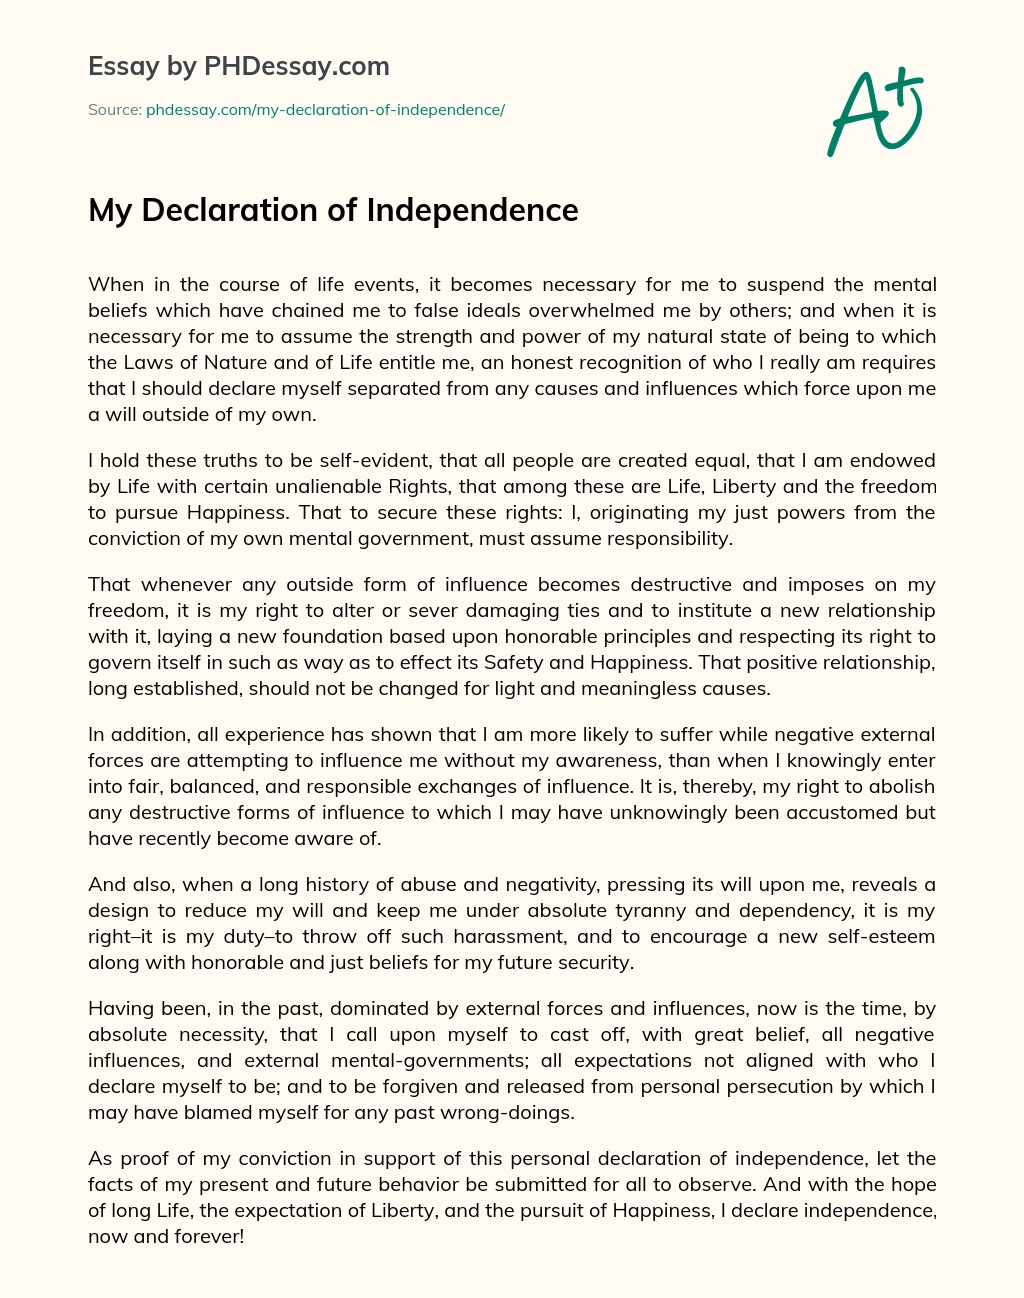 Реферат: Explanation Of The Declaration Of Independence Essay